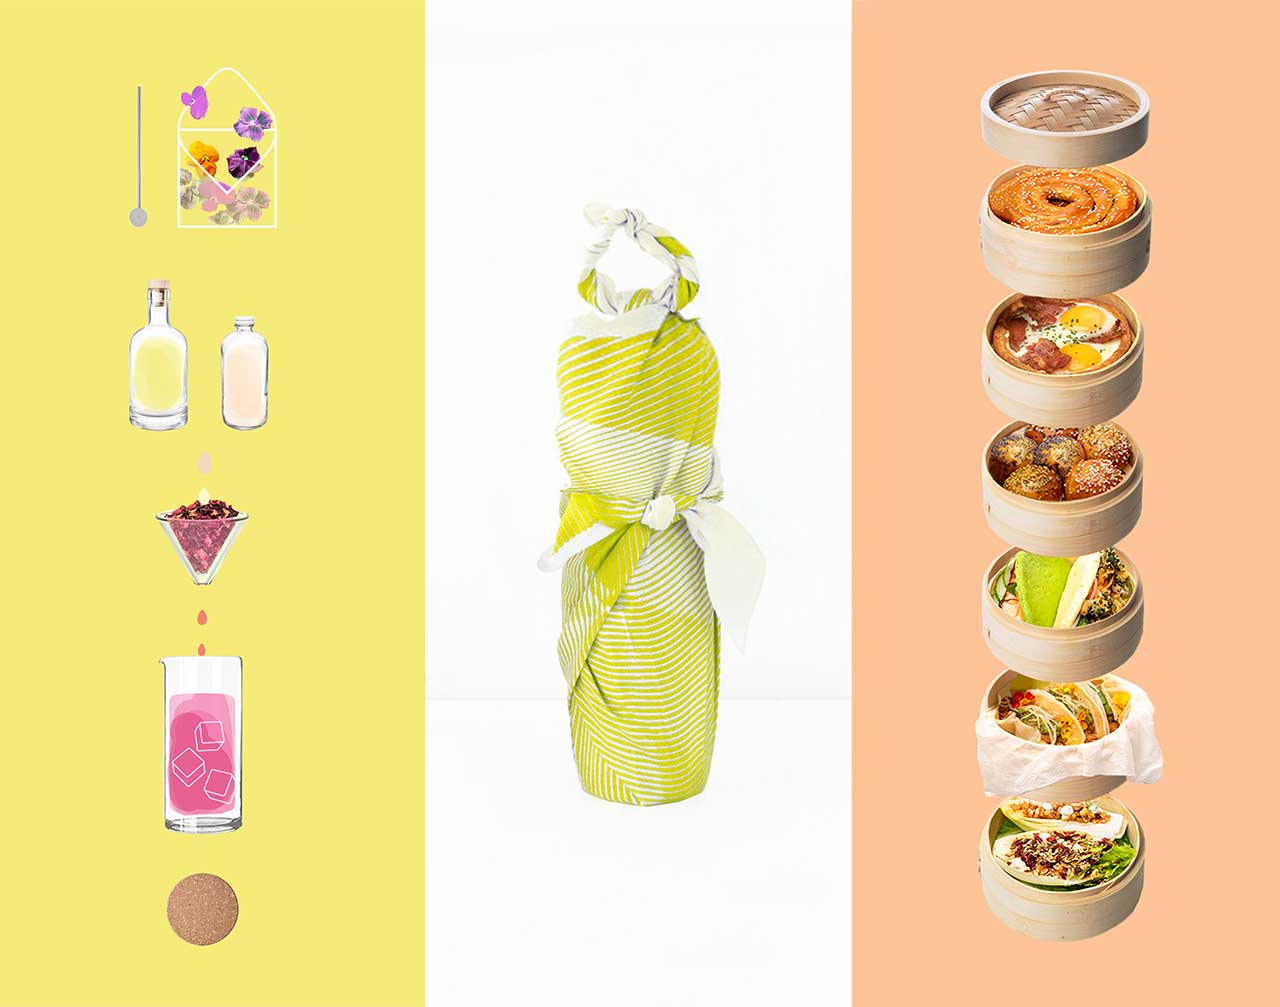 Introducing Parcel by Pinch Food Design: Catering Re-Imagined Again